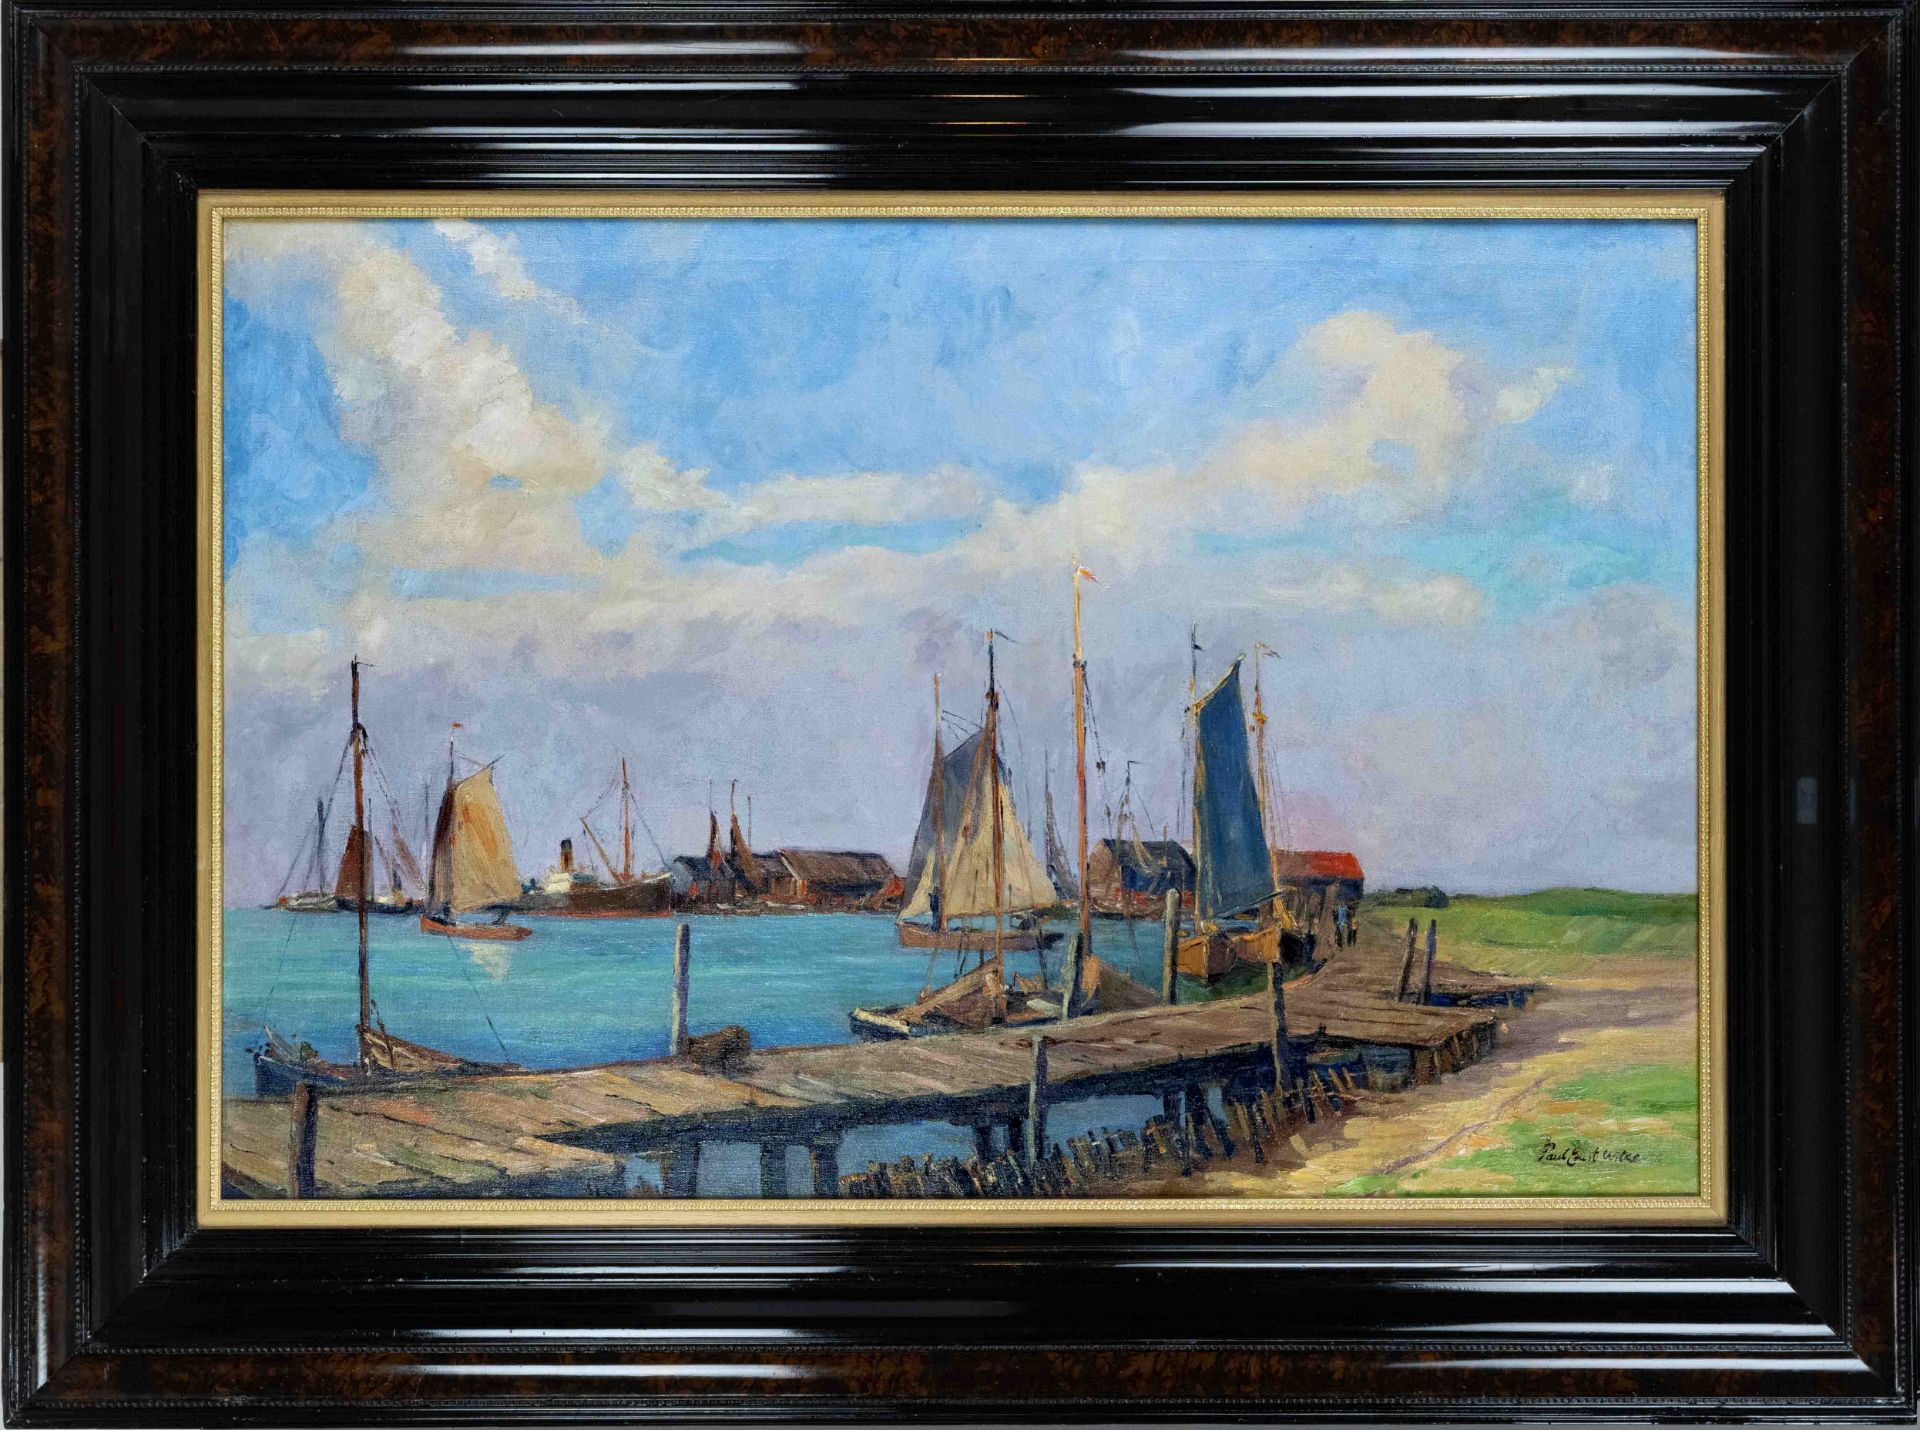 Paul Ernst Wilke (1894-1971), Worpswede painter, large harbor view, oil on canvas, signed lower